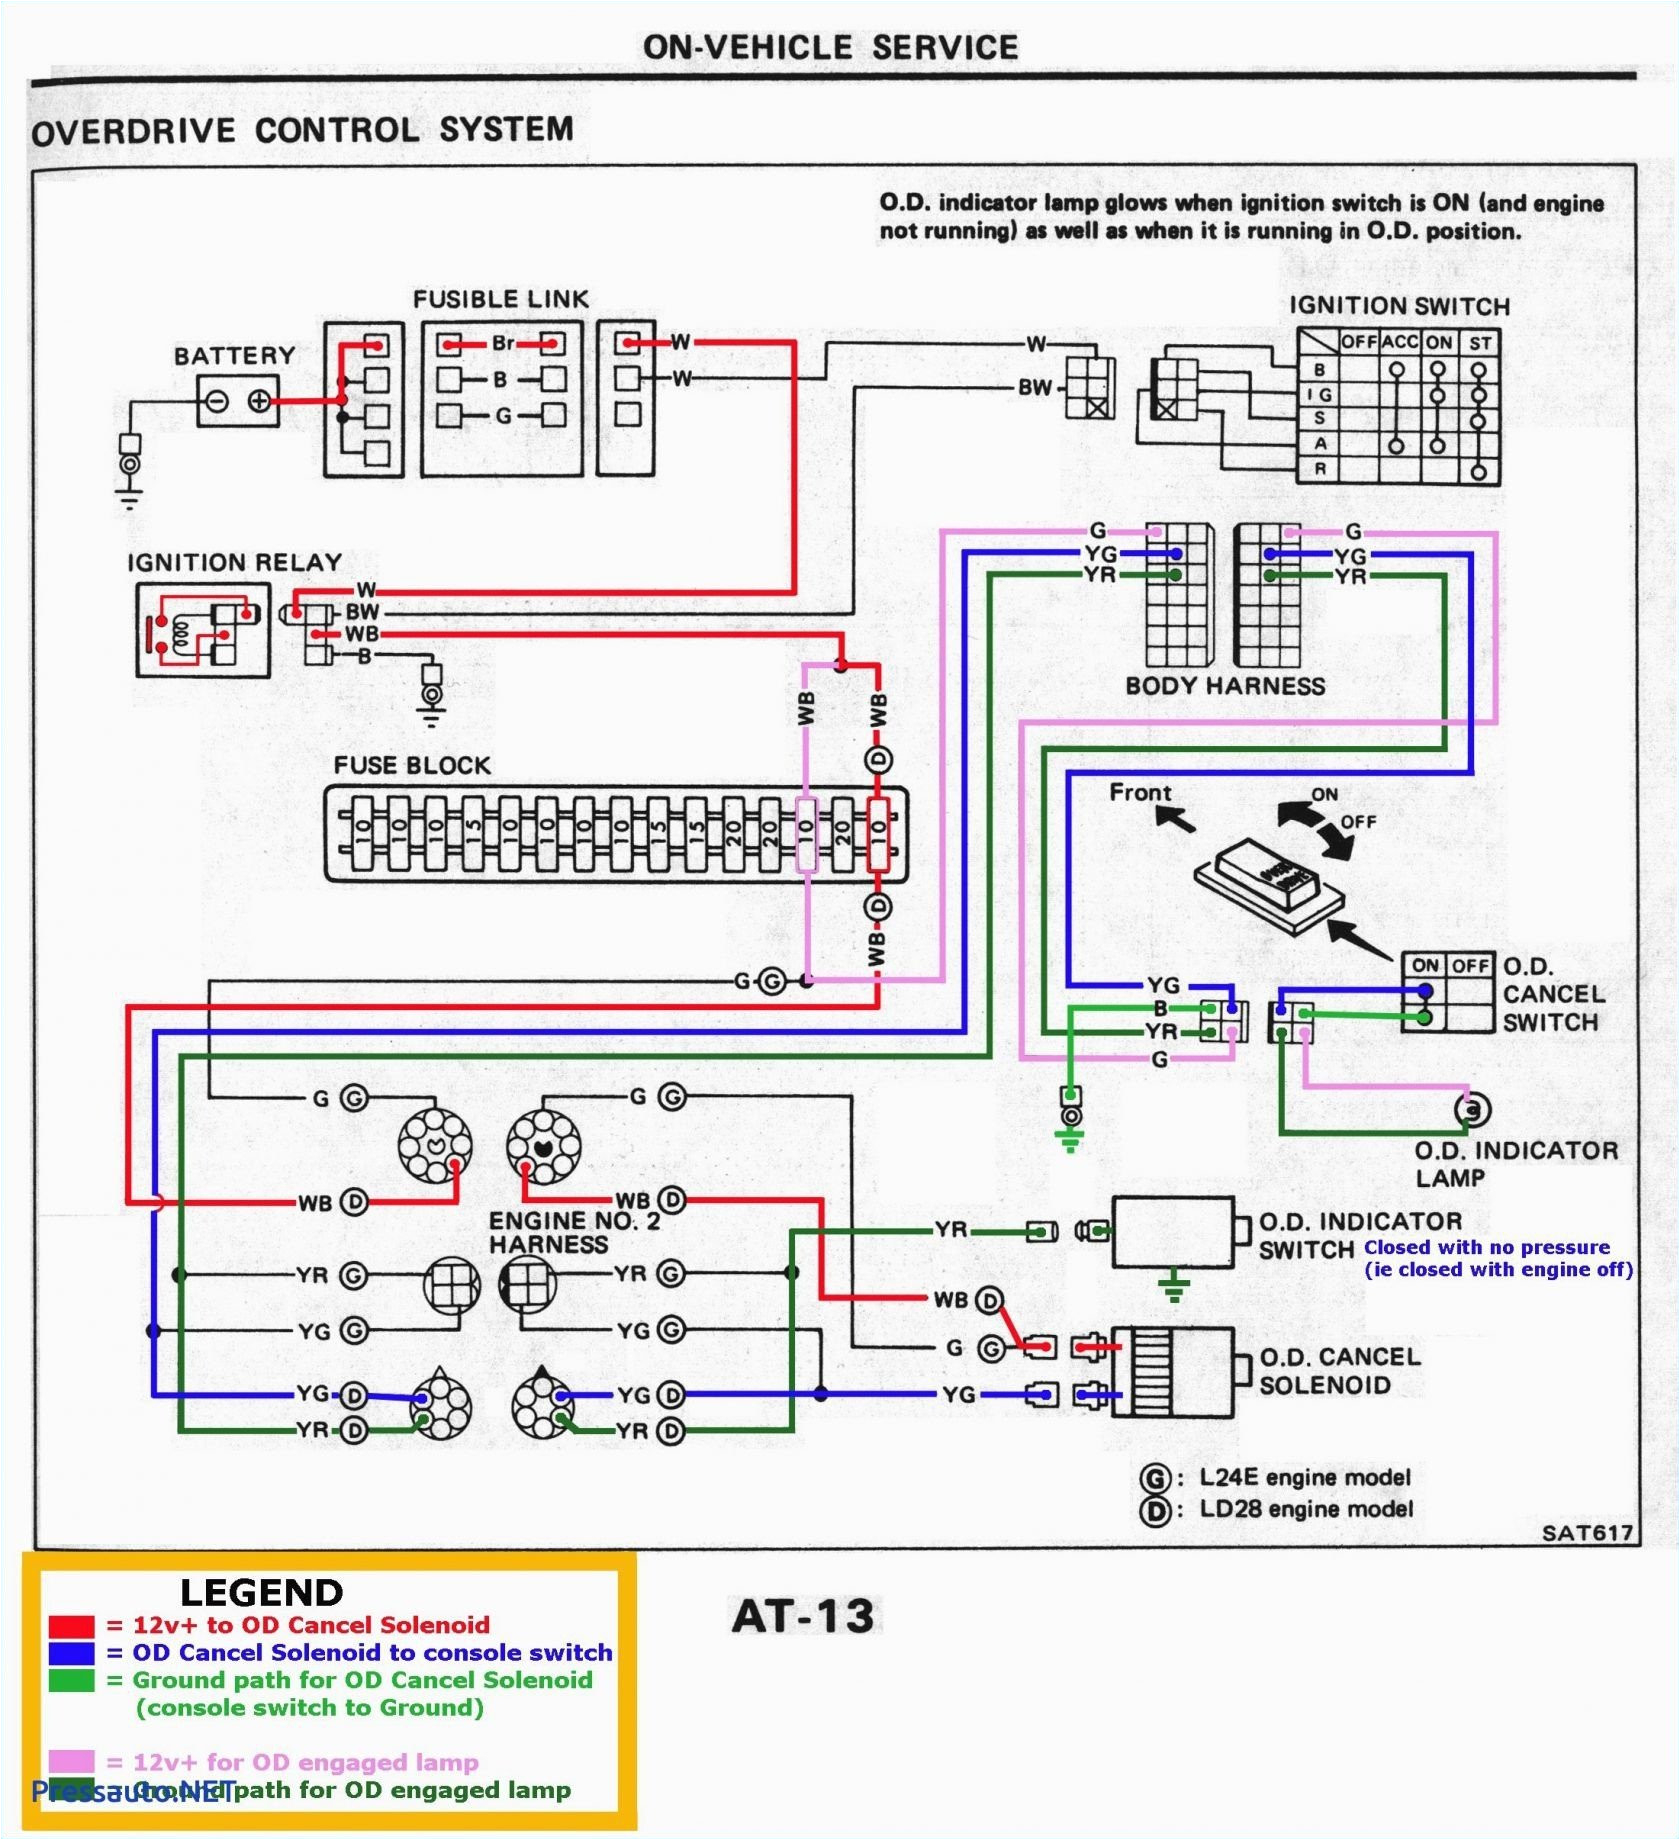 kc hilites c2 ae 6310 roof mount wiring harness wiring diagram kc hilites c2 ae 6310 roof mount wiring harness